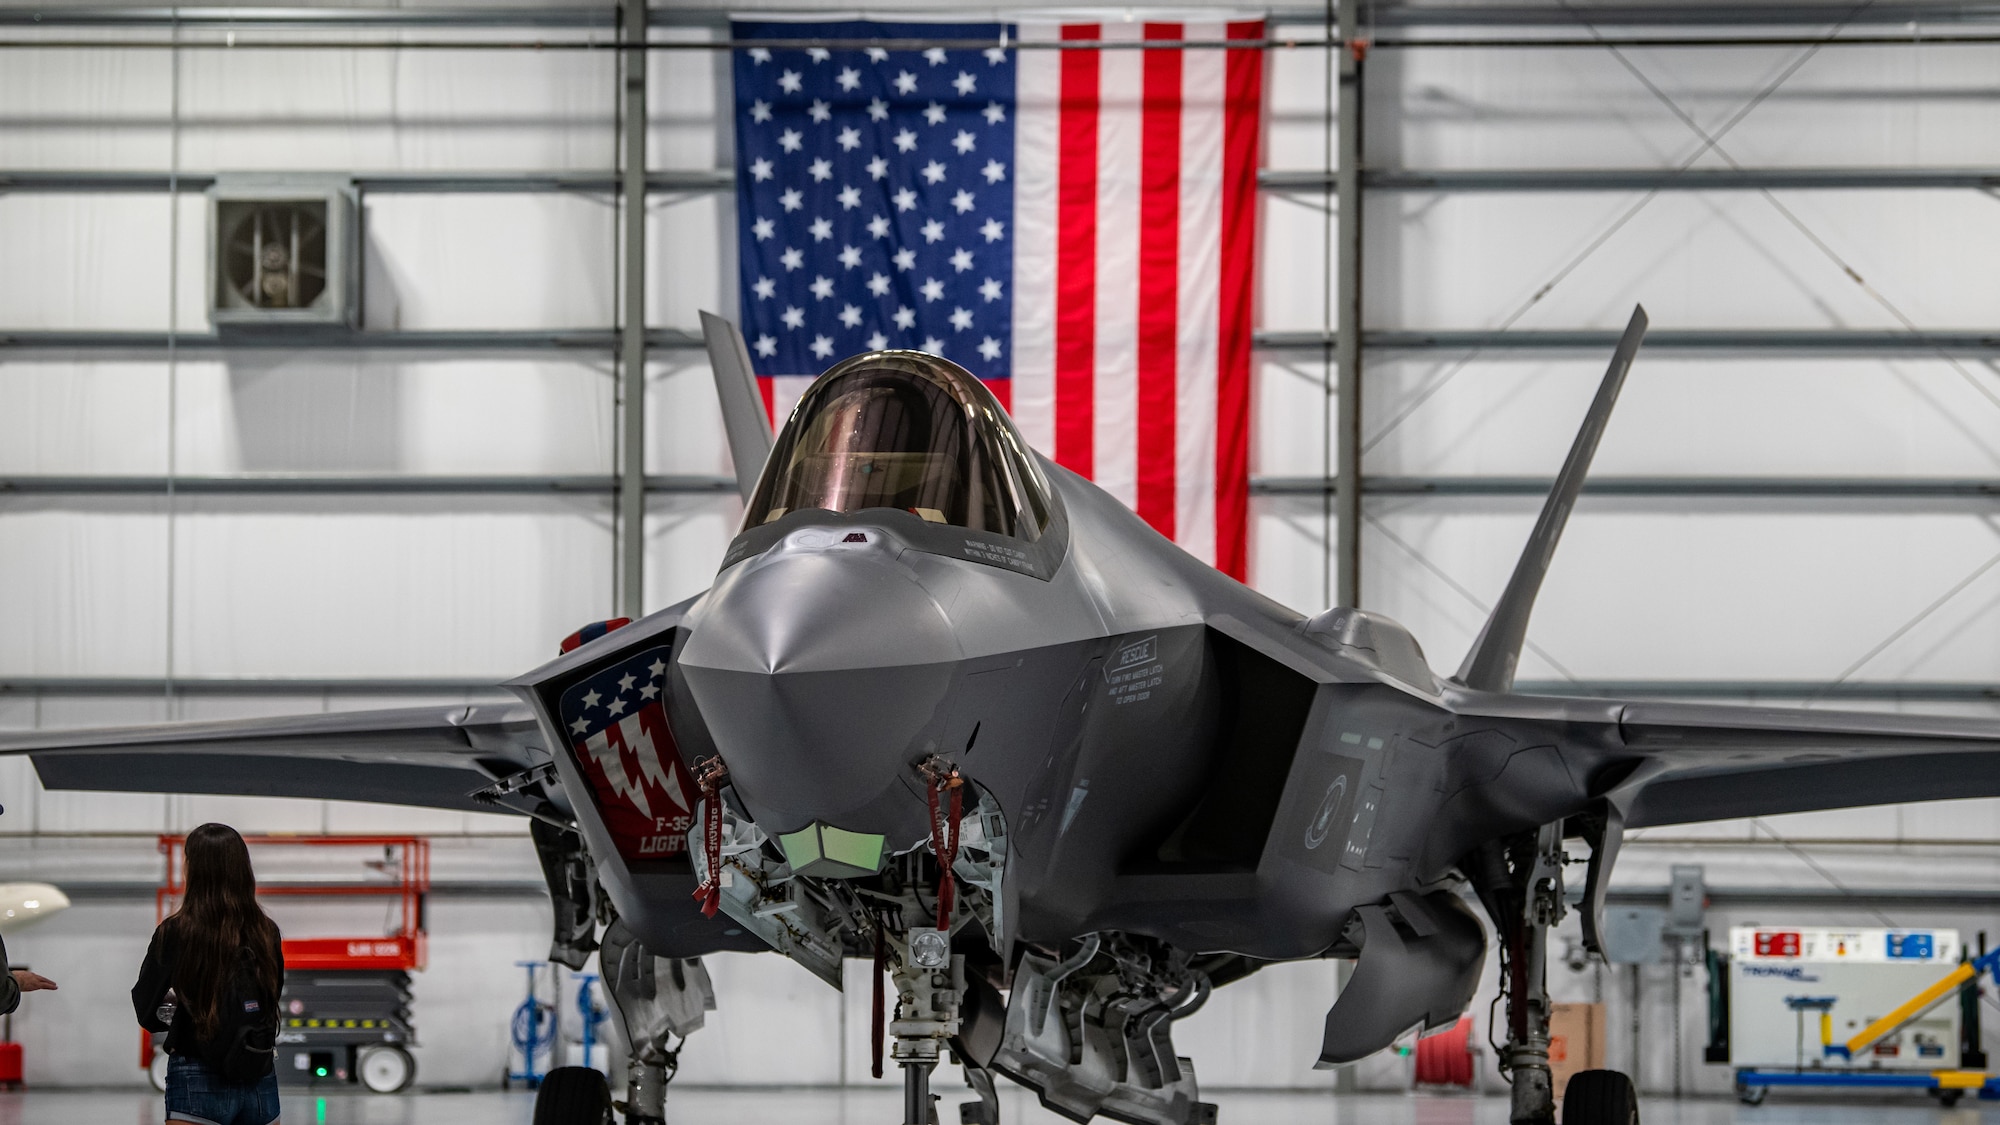 An F-35A Lightning ll sits in a hangar at Lakeland Linder International Airport, Lakeland, Fla., following an aerobatic routine by the F-35A Lightning ll demonstration team at the Sun 'n Fun Holiday Flying Festival, Dec. 4, 2020. The Lightning II is a stealth-capable, multi-role attack fighter designed to penetrate the most hostile areas of the world without the threat of detection. (U.S. Air Force photo by Staff Sgt. Codie Trimble)